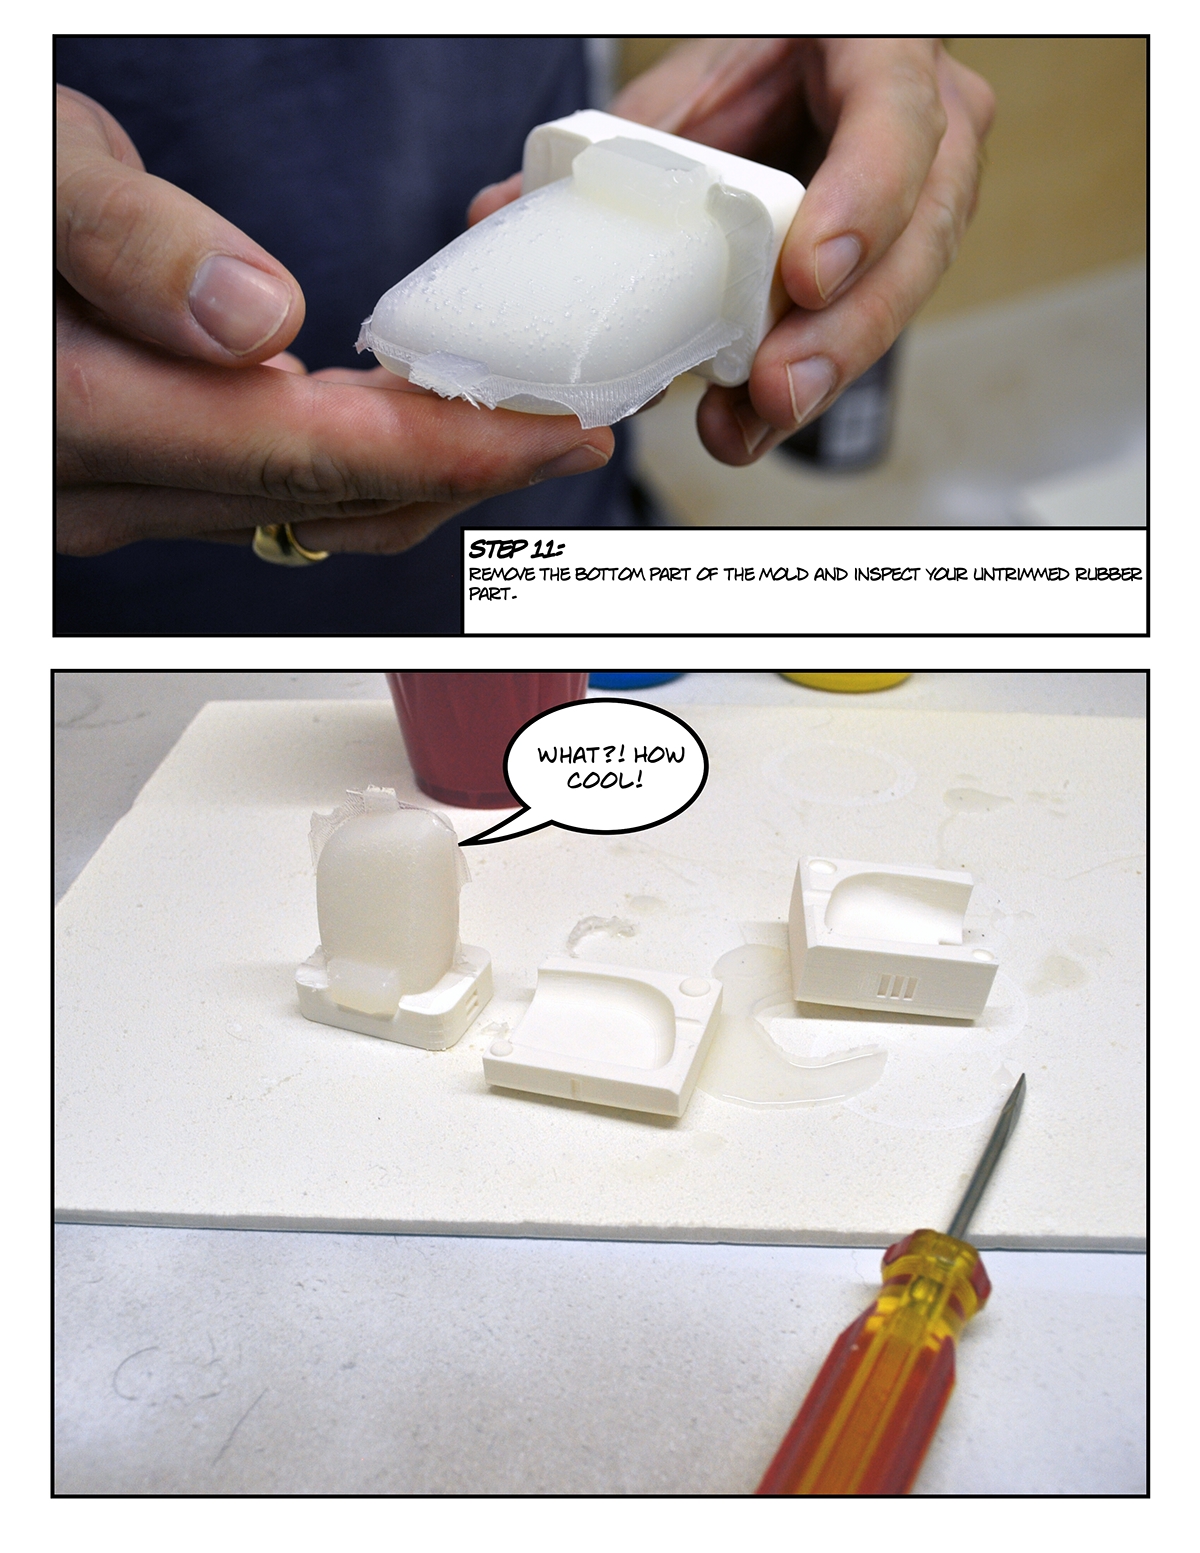 Mold Design comic strip whimsical Prototyping